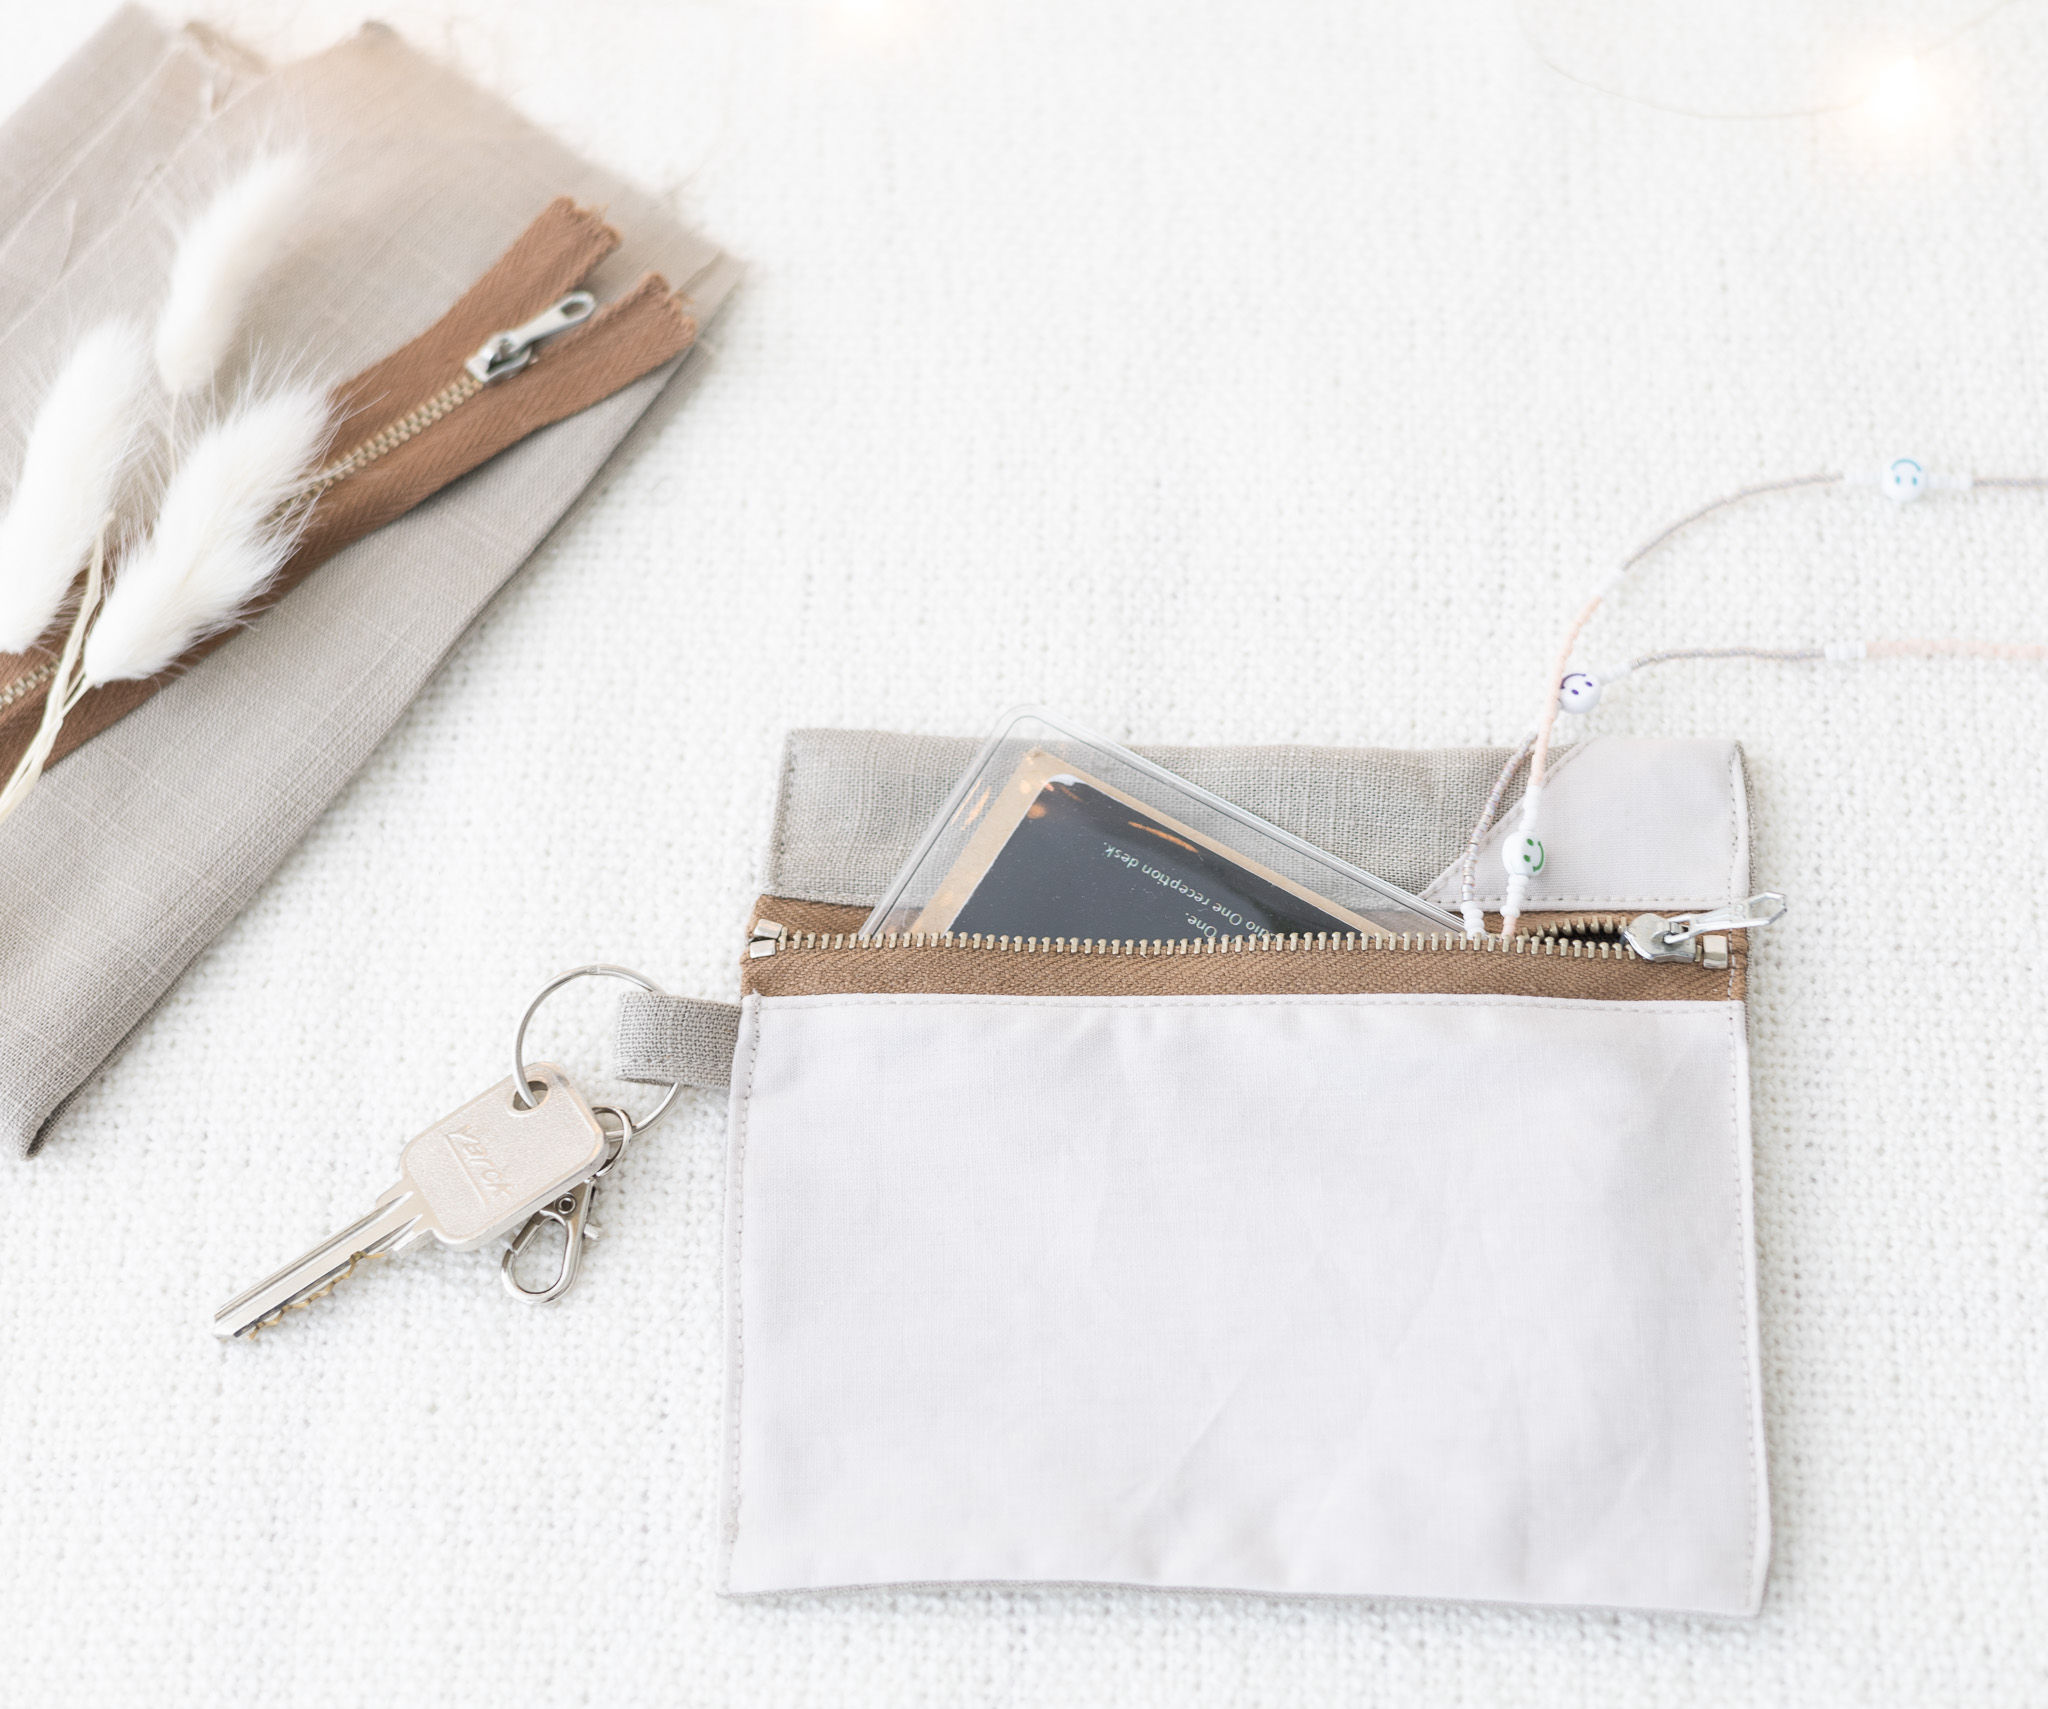 How to make a small zipper coin pouch